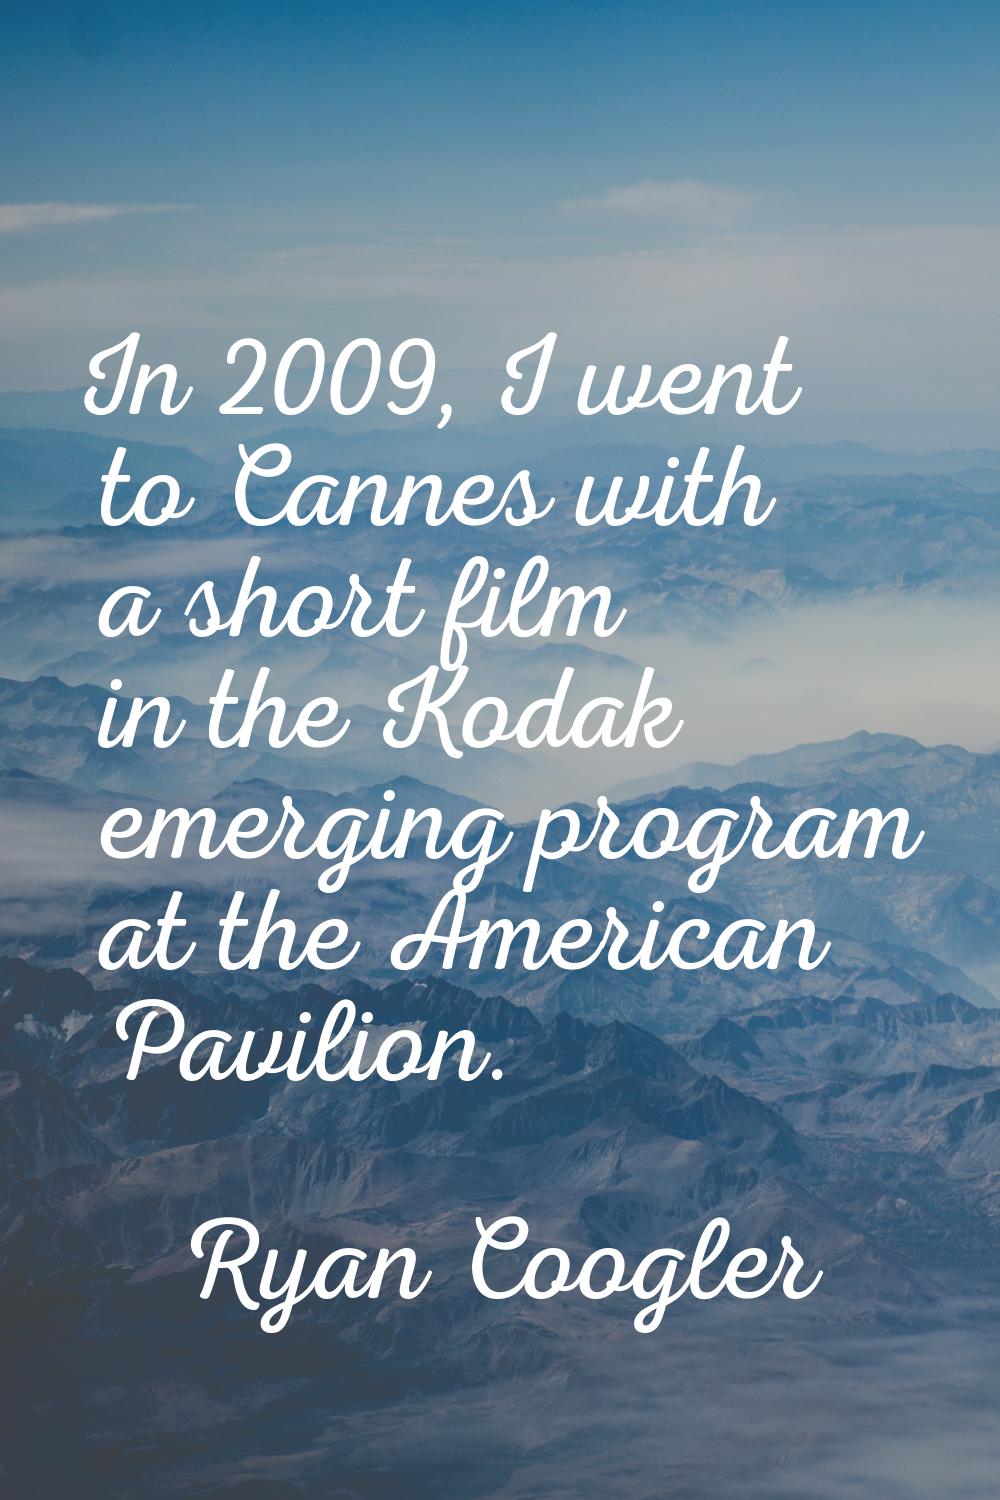 In 2009, I went to Cannes with a short film in the Kodak emerging program at the American Pavilion.